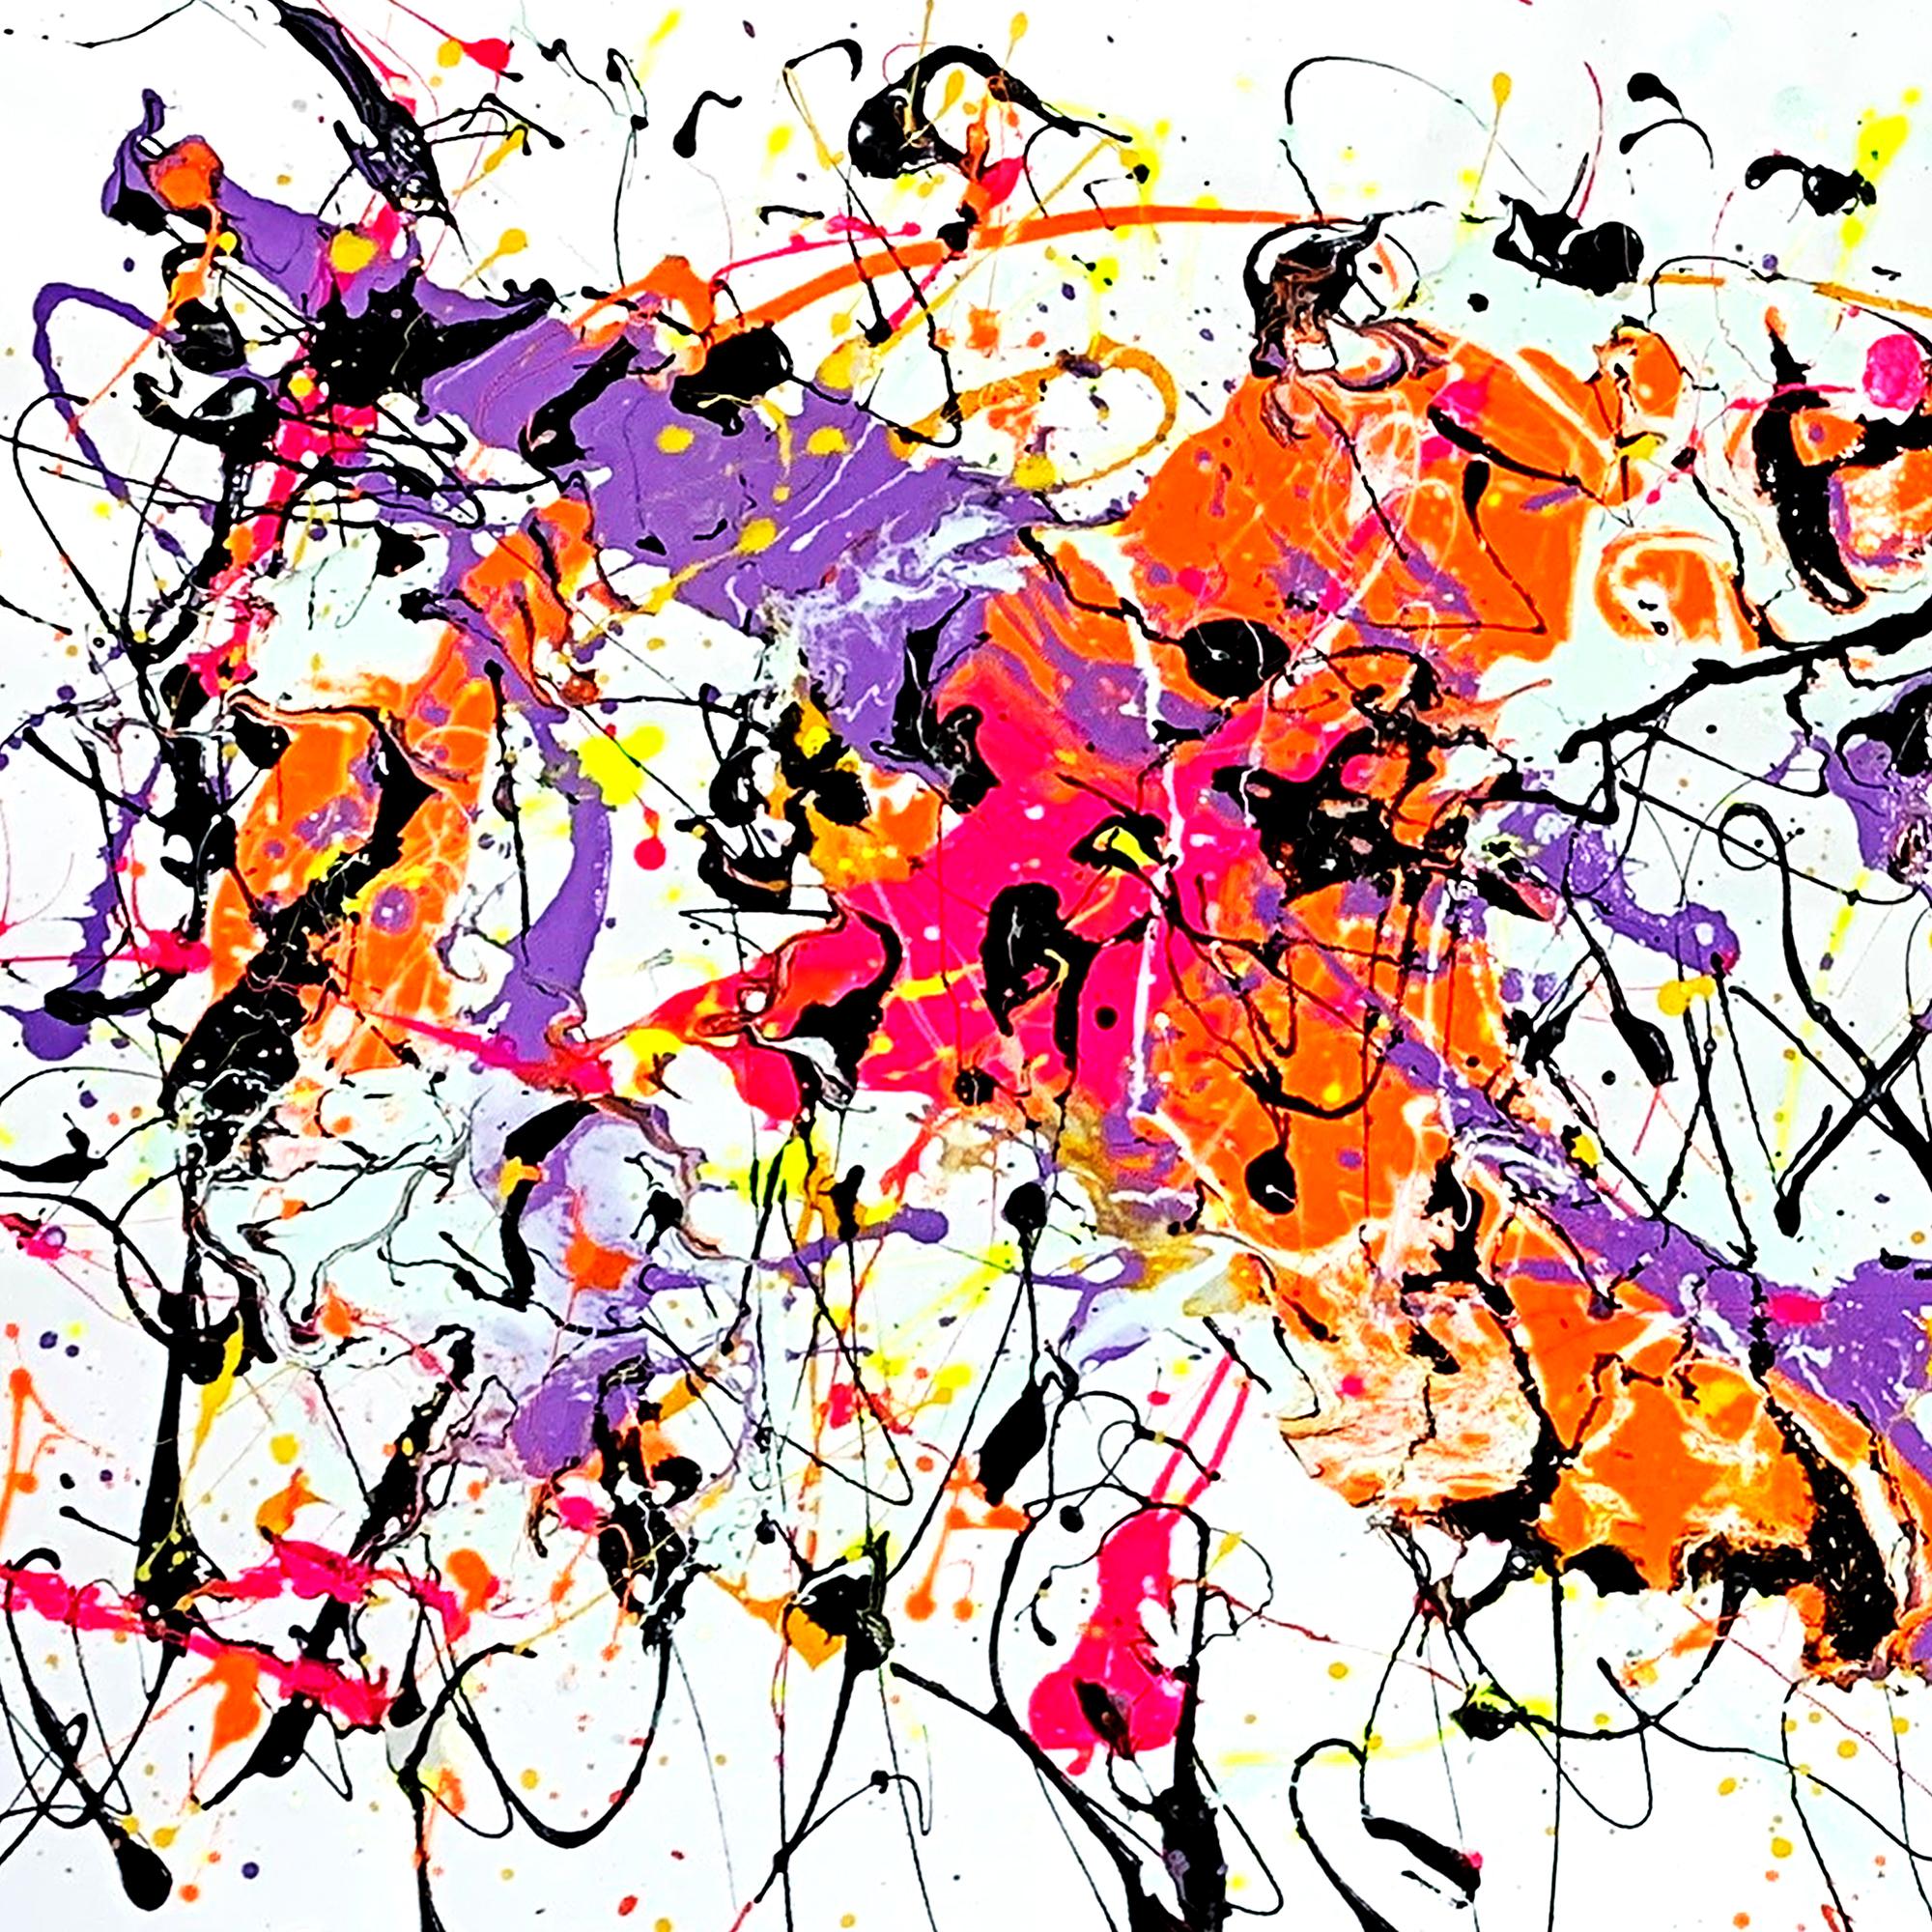 Freestyle Colourscape - Abstract Expressionist Painting by Estelle Asmodelle